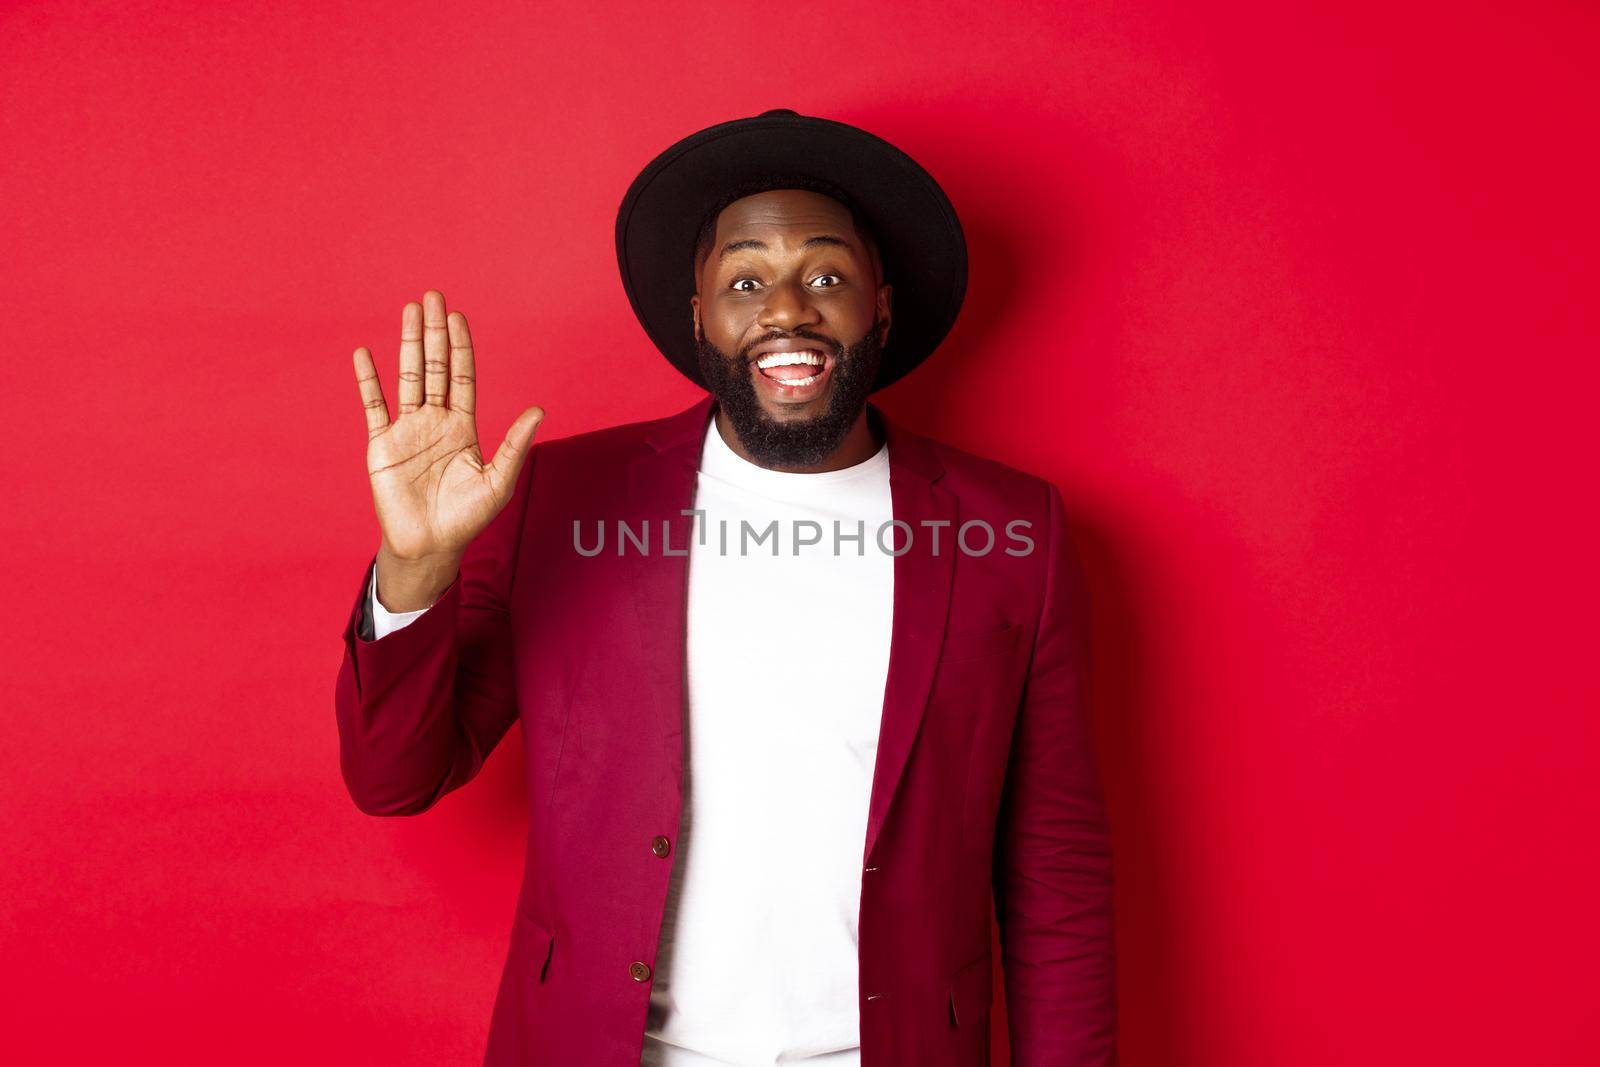 Friendly african american guy waving hand, saying hello and smiling, greeting you, standing over red background.